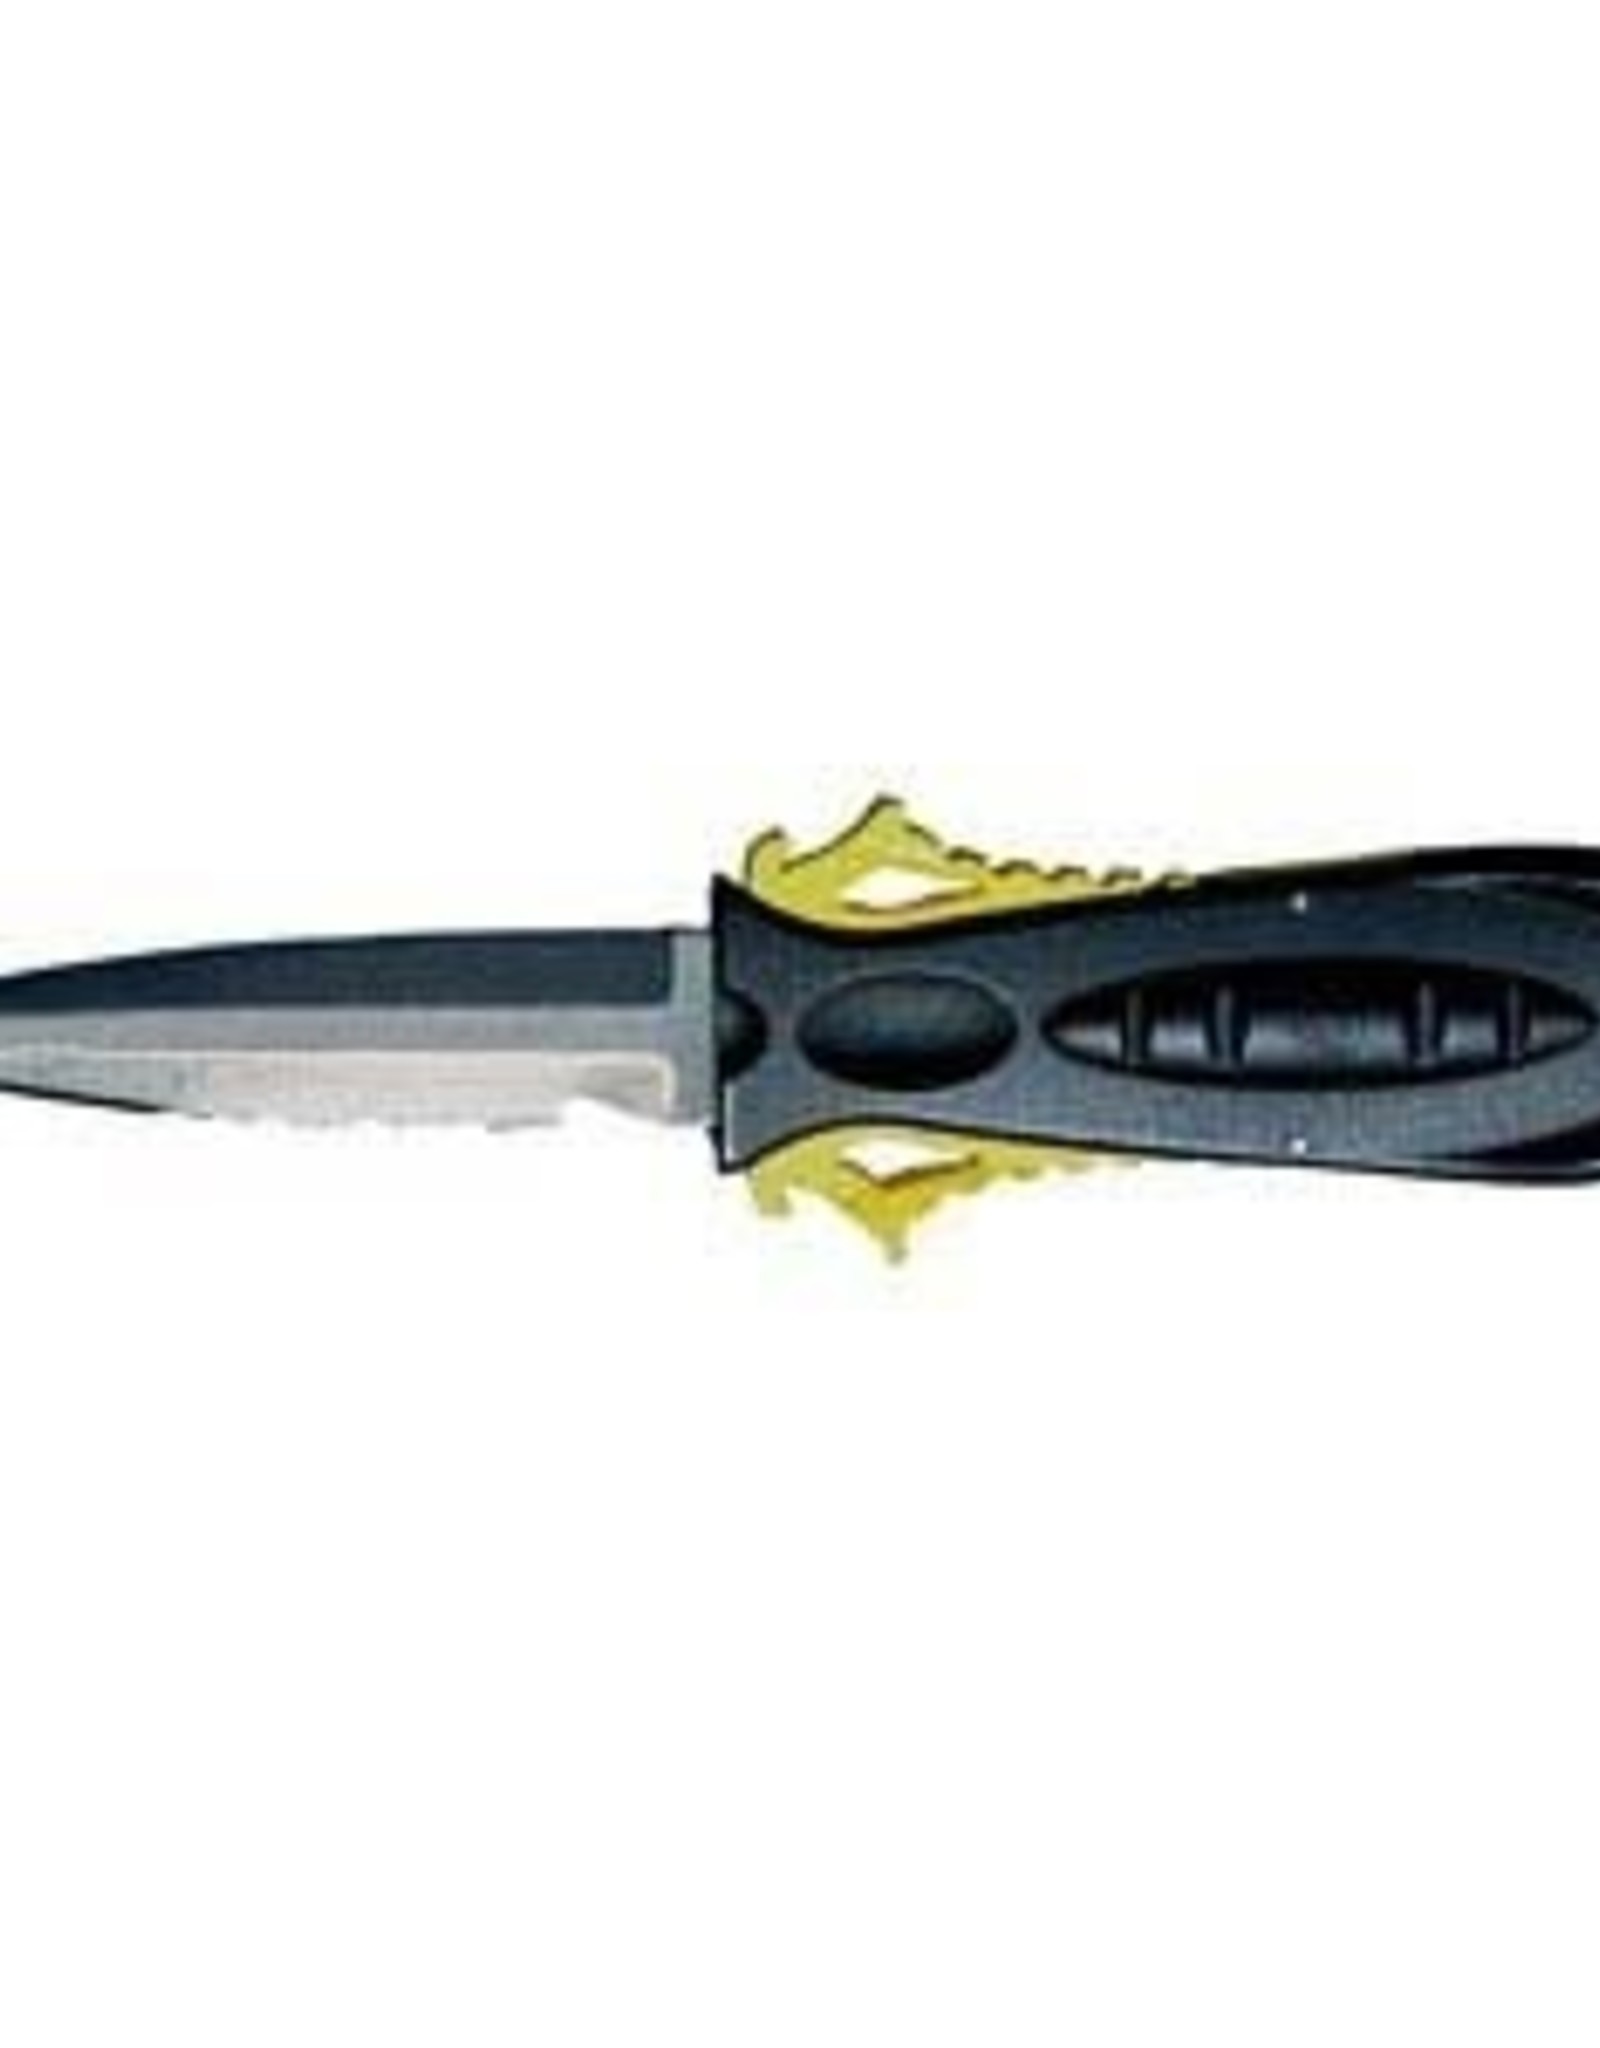 Stohlquist Knife Squeeze, Blunt Tip, Yellow